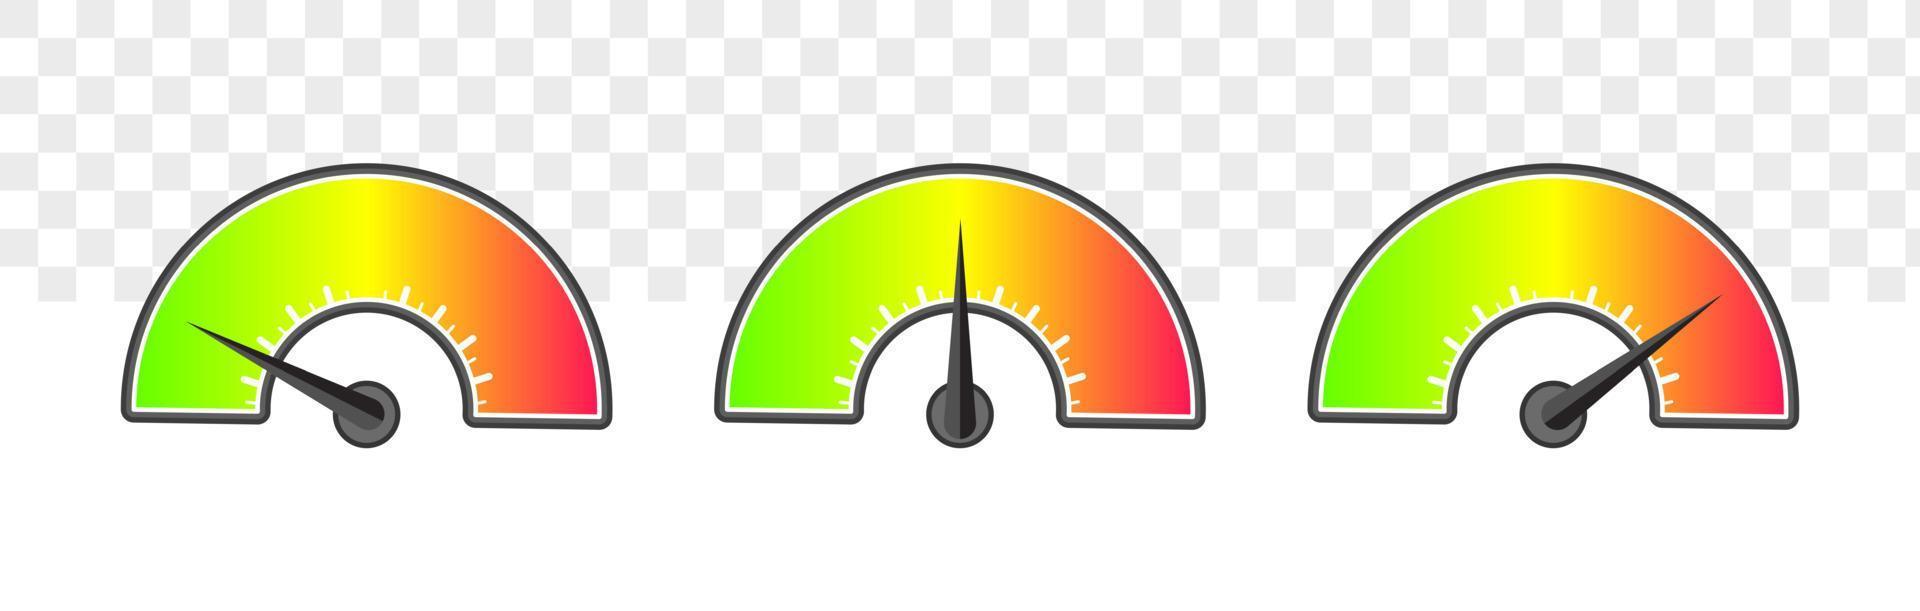 Risk meter indicator concept. Risk button pointing between low and high level. vector